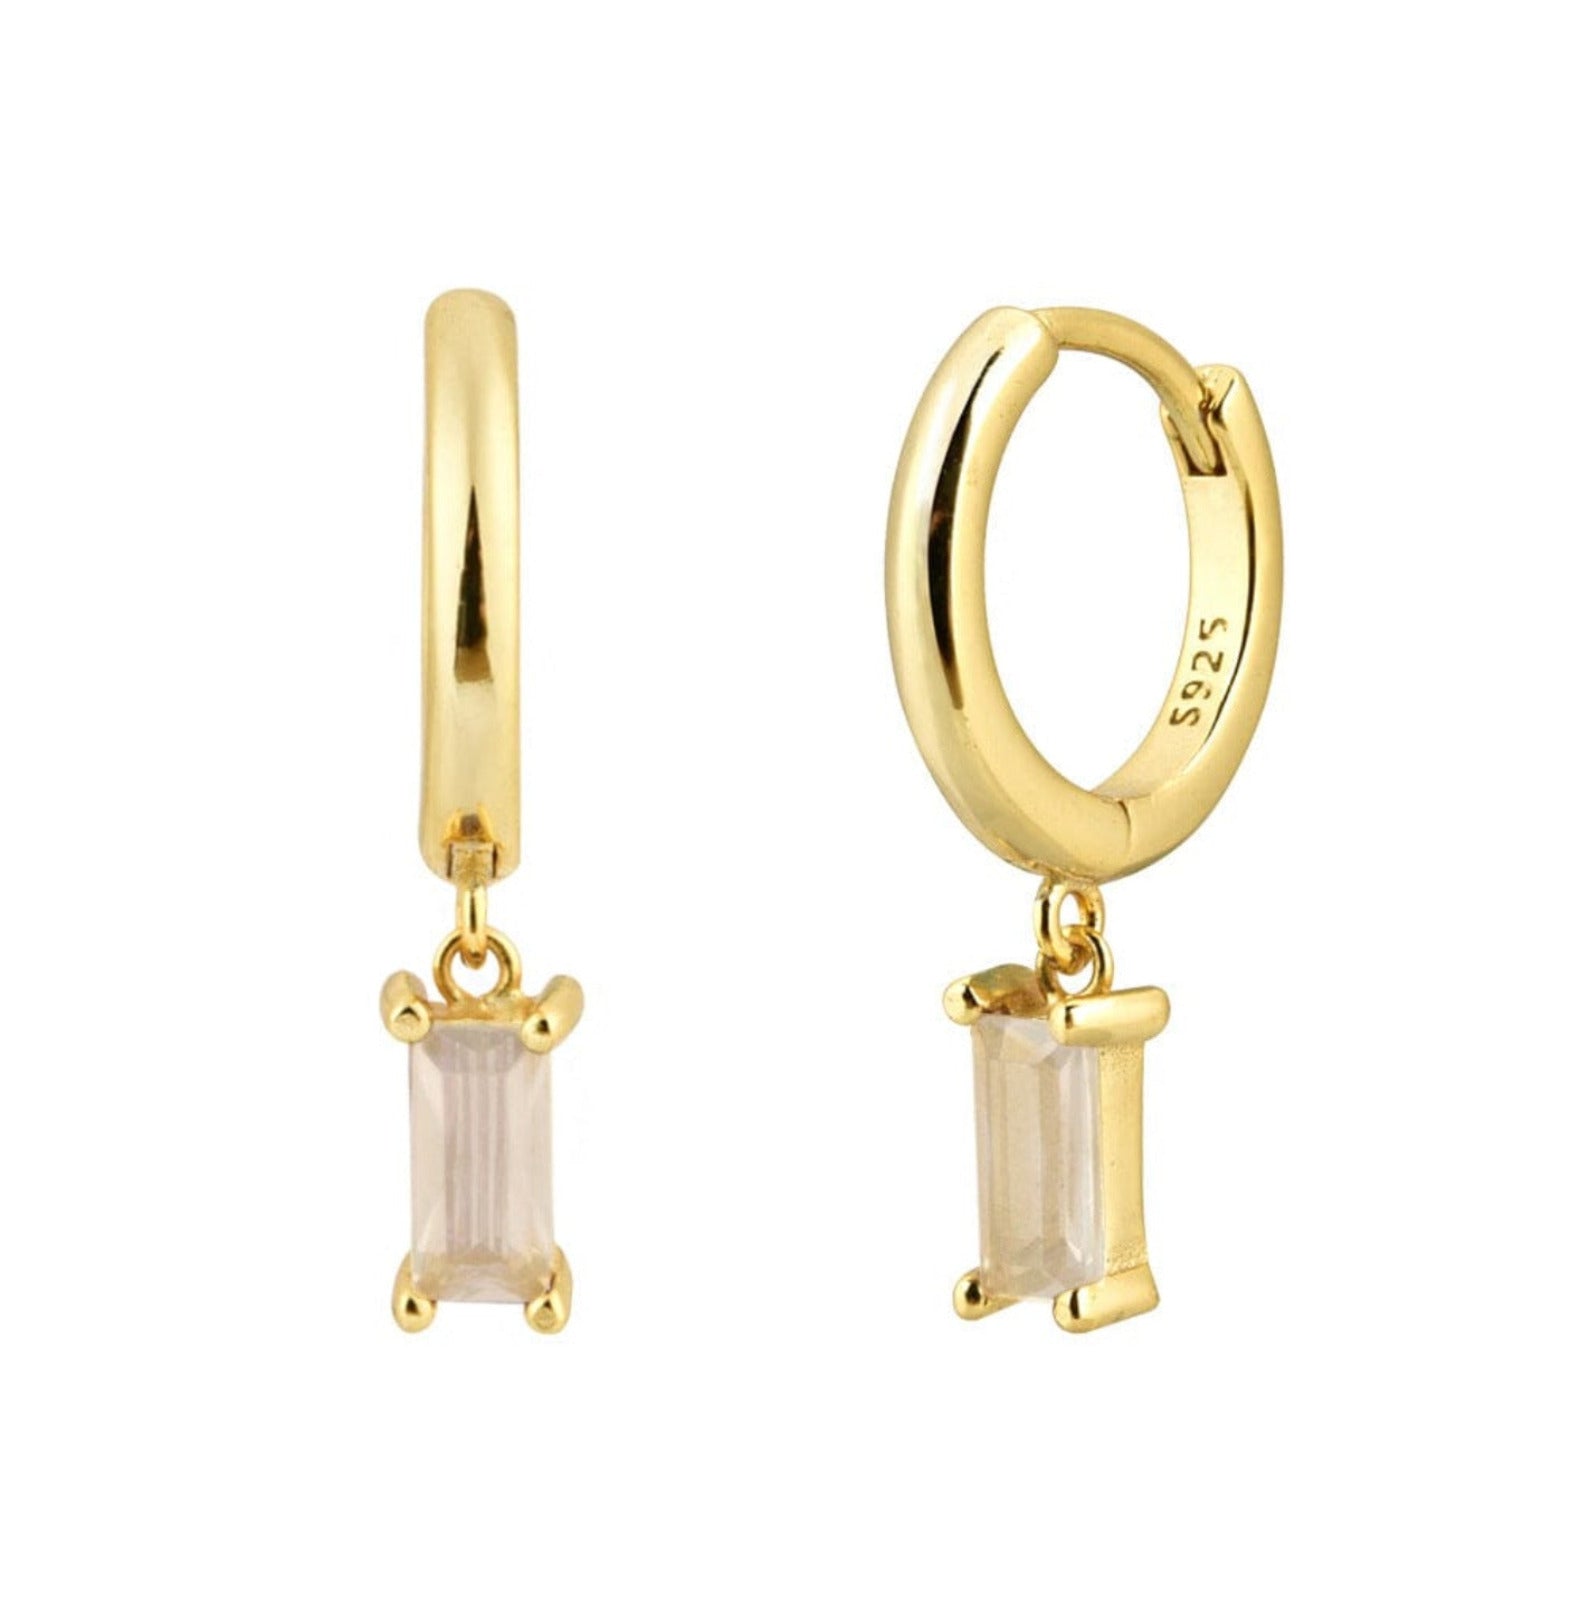 DAINTY EARRINGS earing Yubama Jewelry Online Store - The Elegant Designs of Gold and Silver ! Milk White 